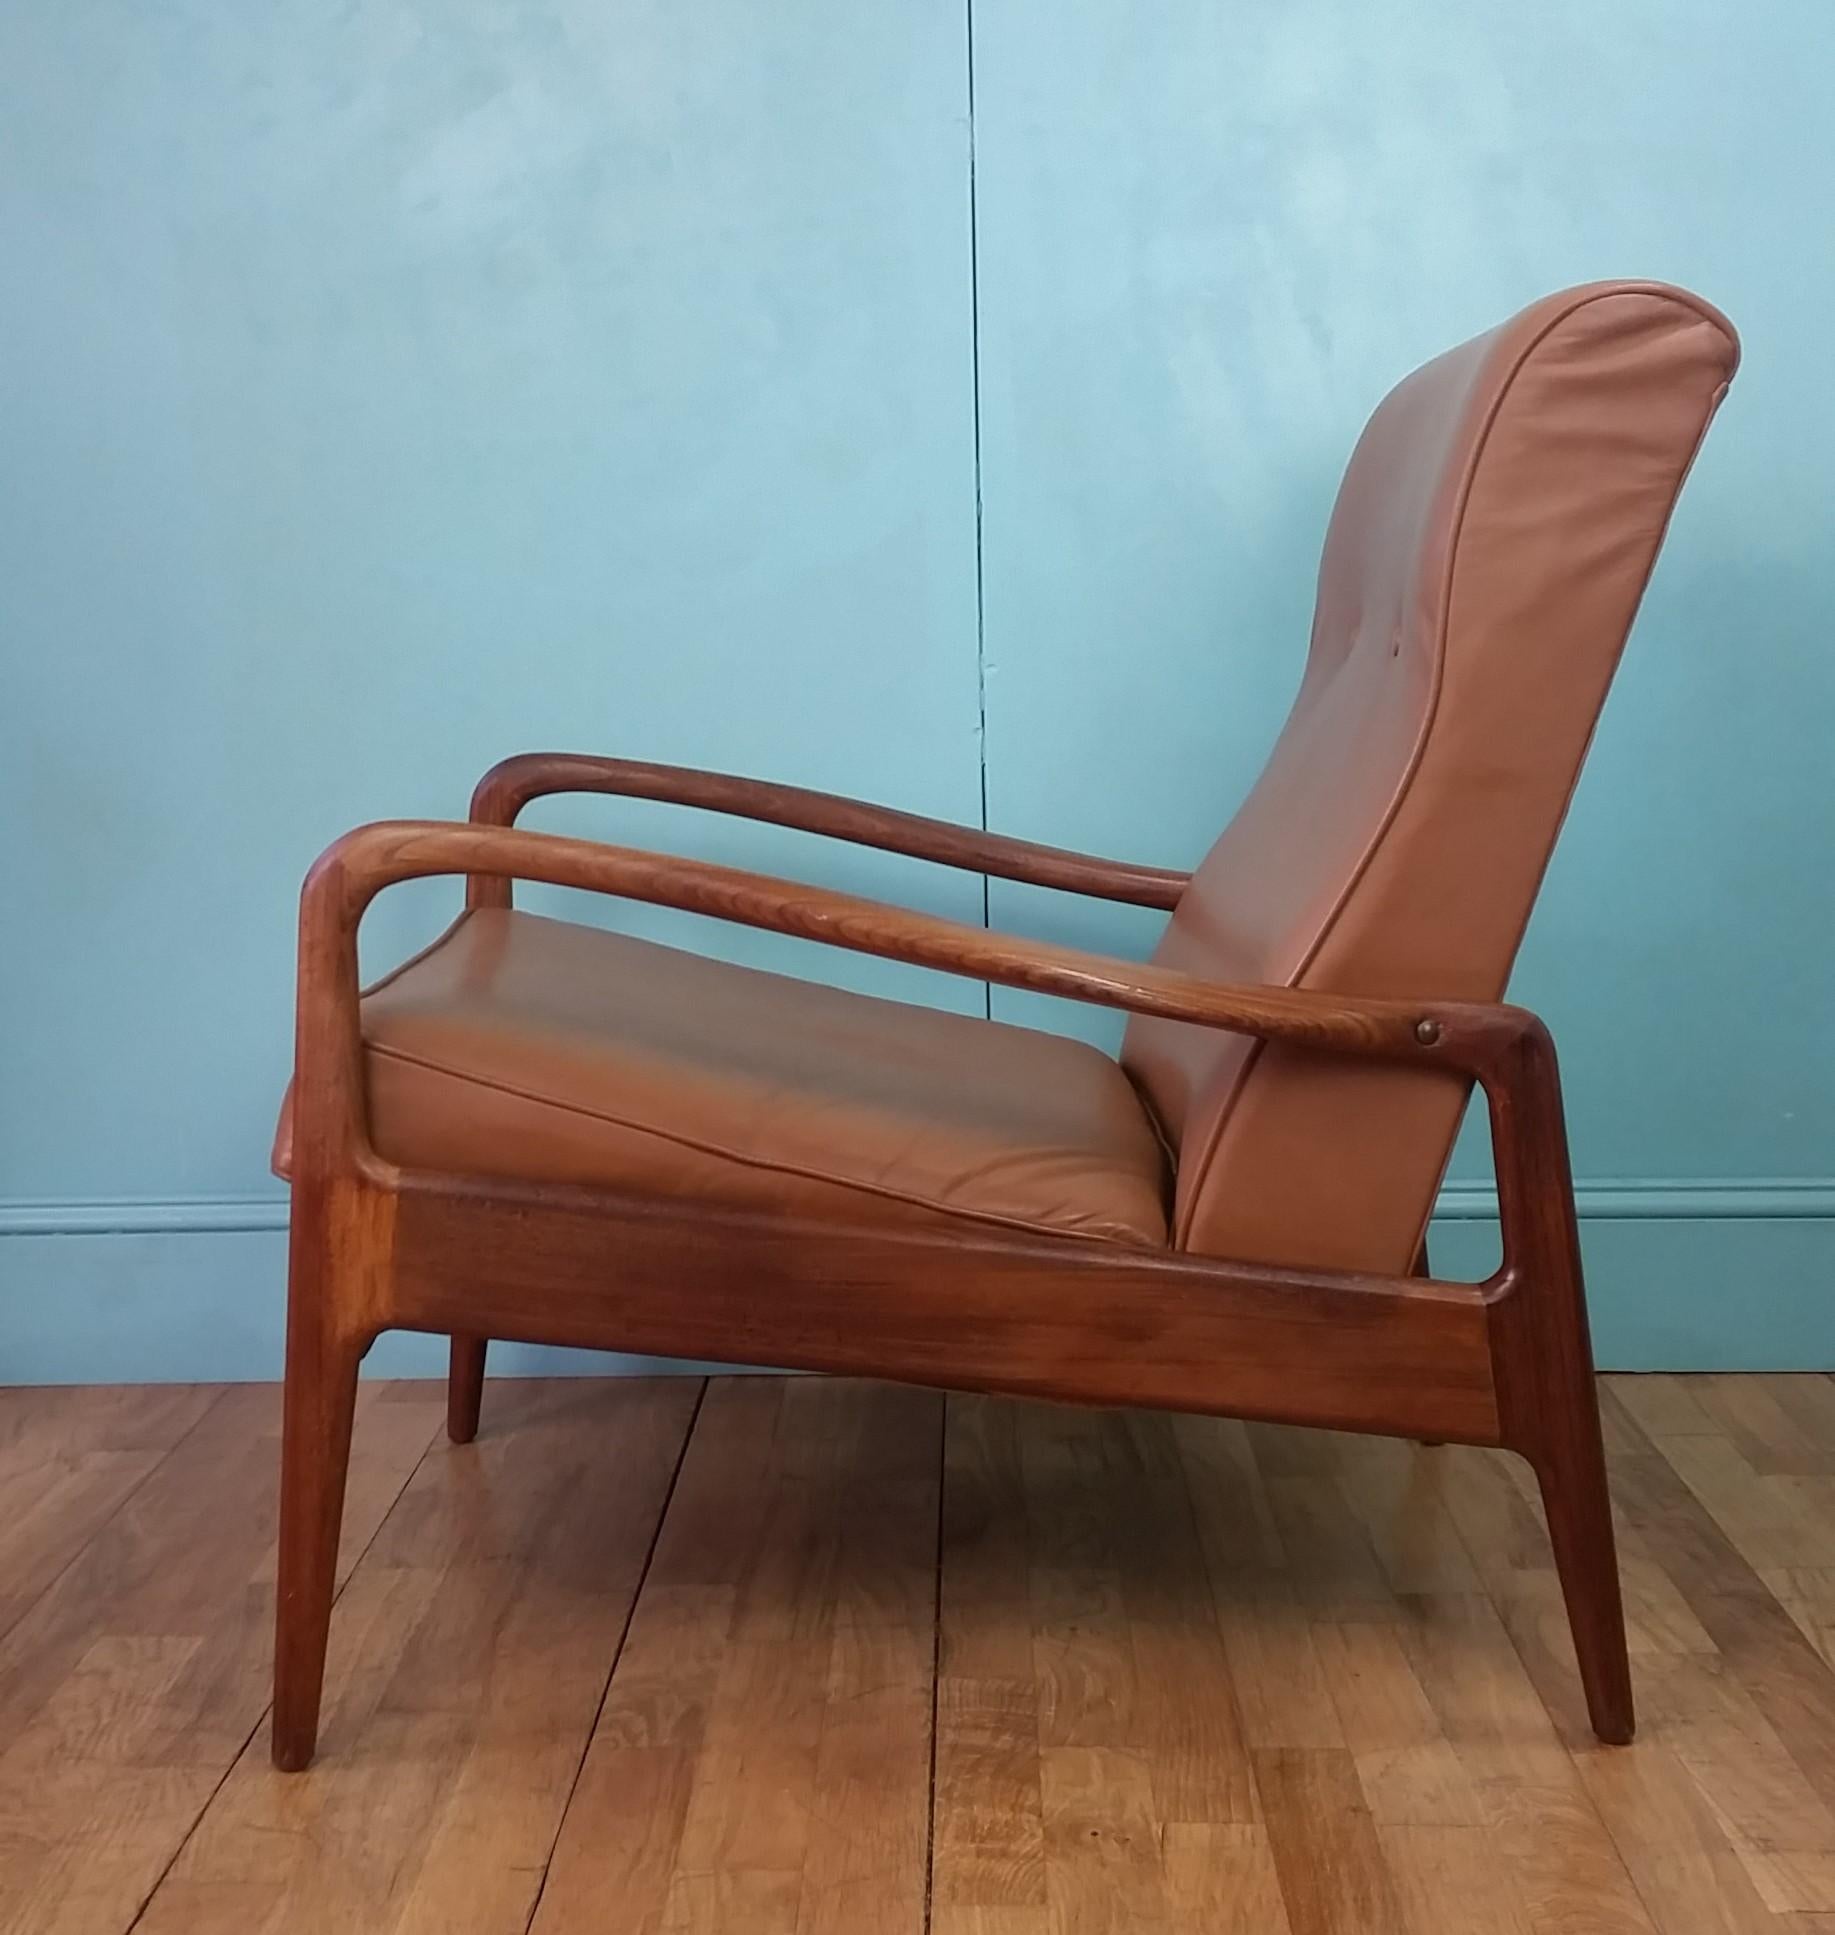 Greaves & Thomas leather lounge chair circa 1950's
Solid teak frame with sweeping sculptural armrests and soft caramel coloured leather upholstery.
Elegant and timeless mid century design to add a real presence to any interior project.
The chair